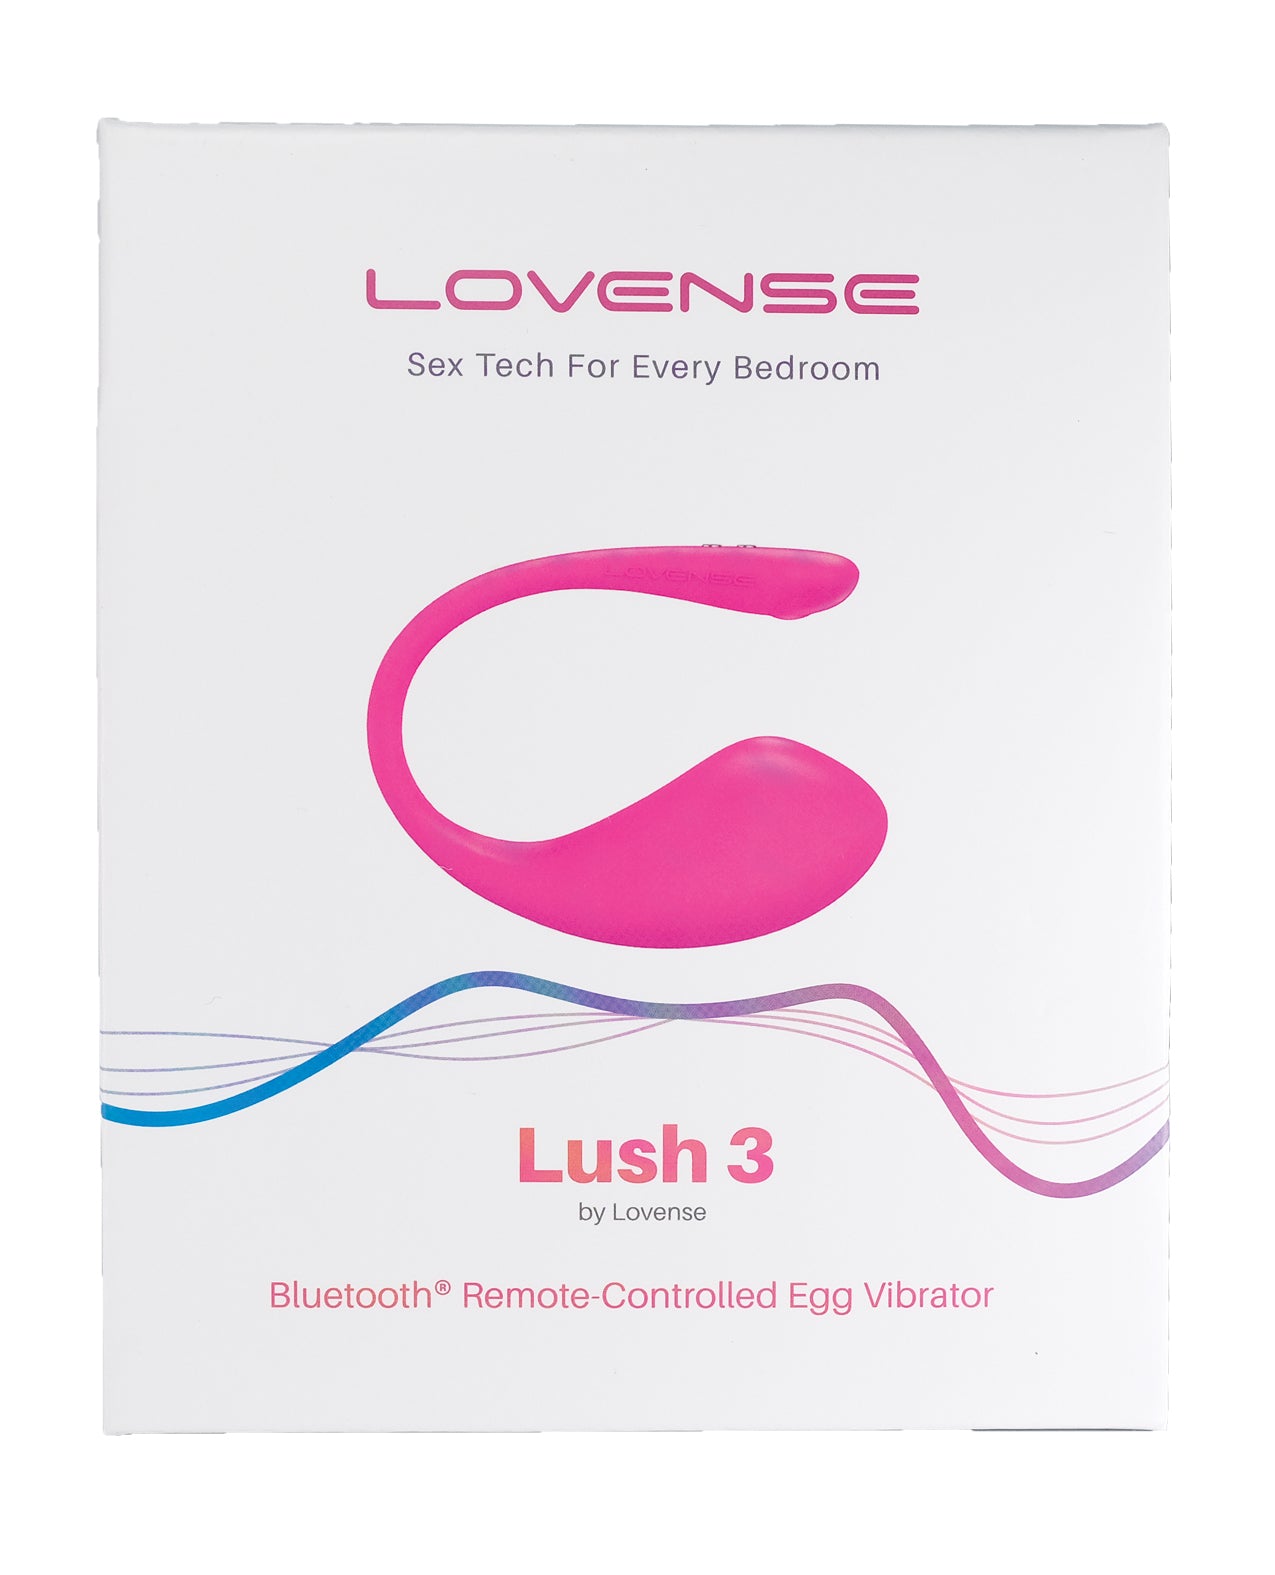 Lovense Lush 3.0 Sound Activated Camming Pink Vibrator